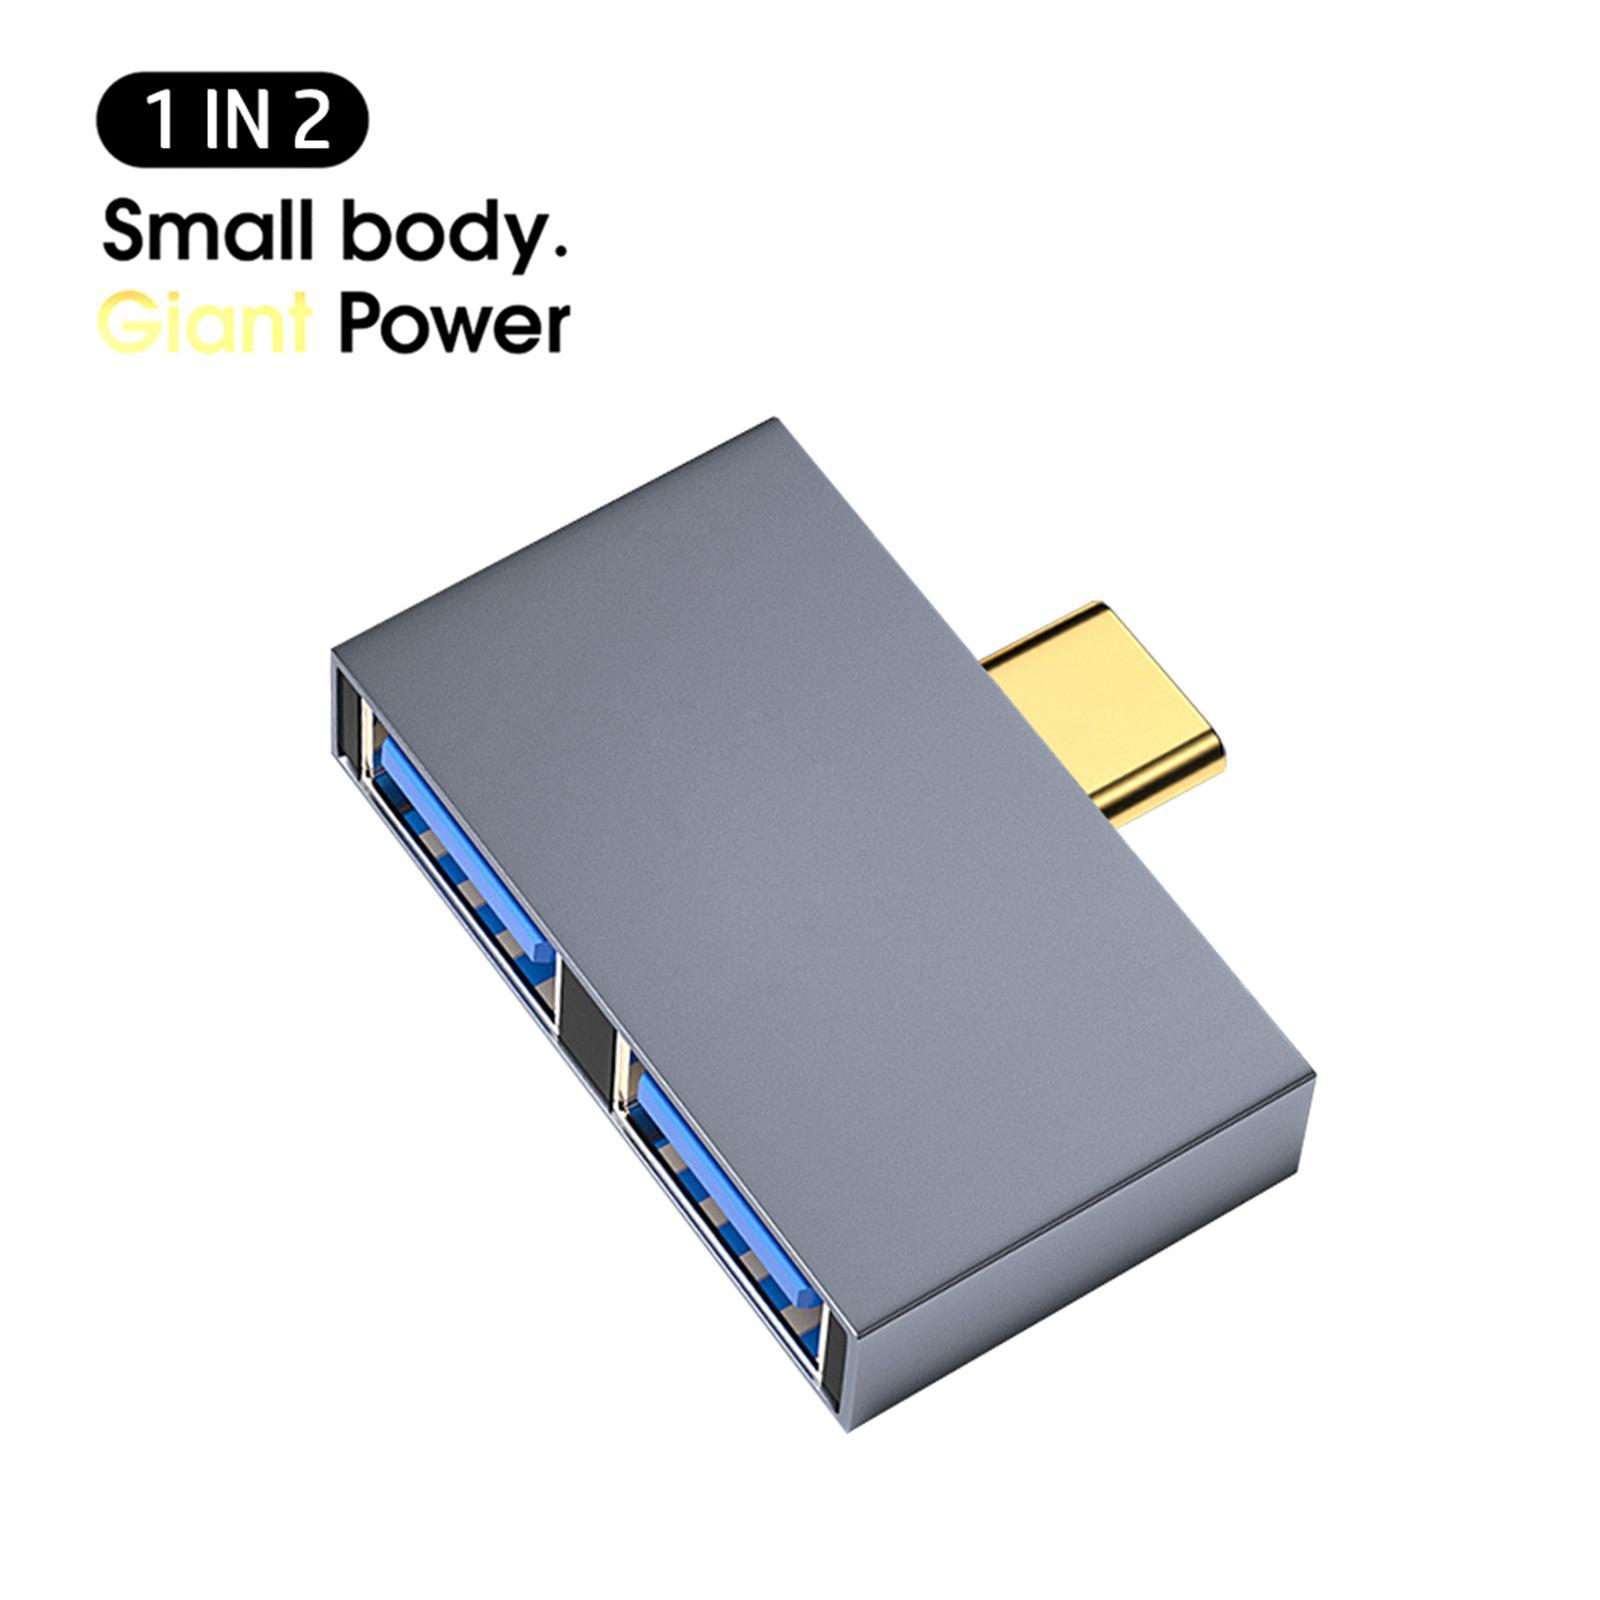 2 in 1 USB C Male to USB 3.0 Female Adapter Compact High Speed Data Transfer Overvoltage Protection 5Gbps Portable USB C to USB A Converter